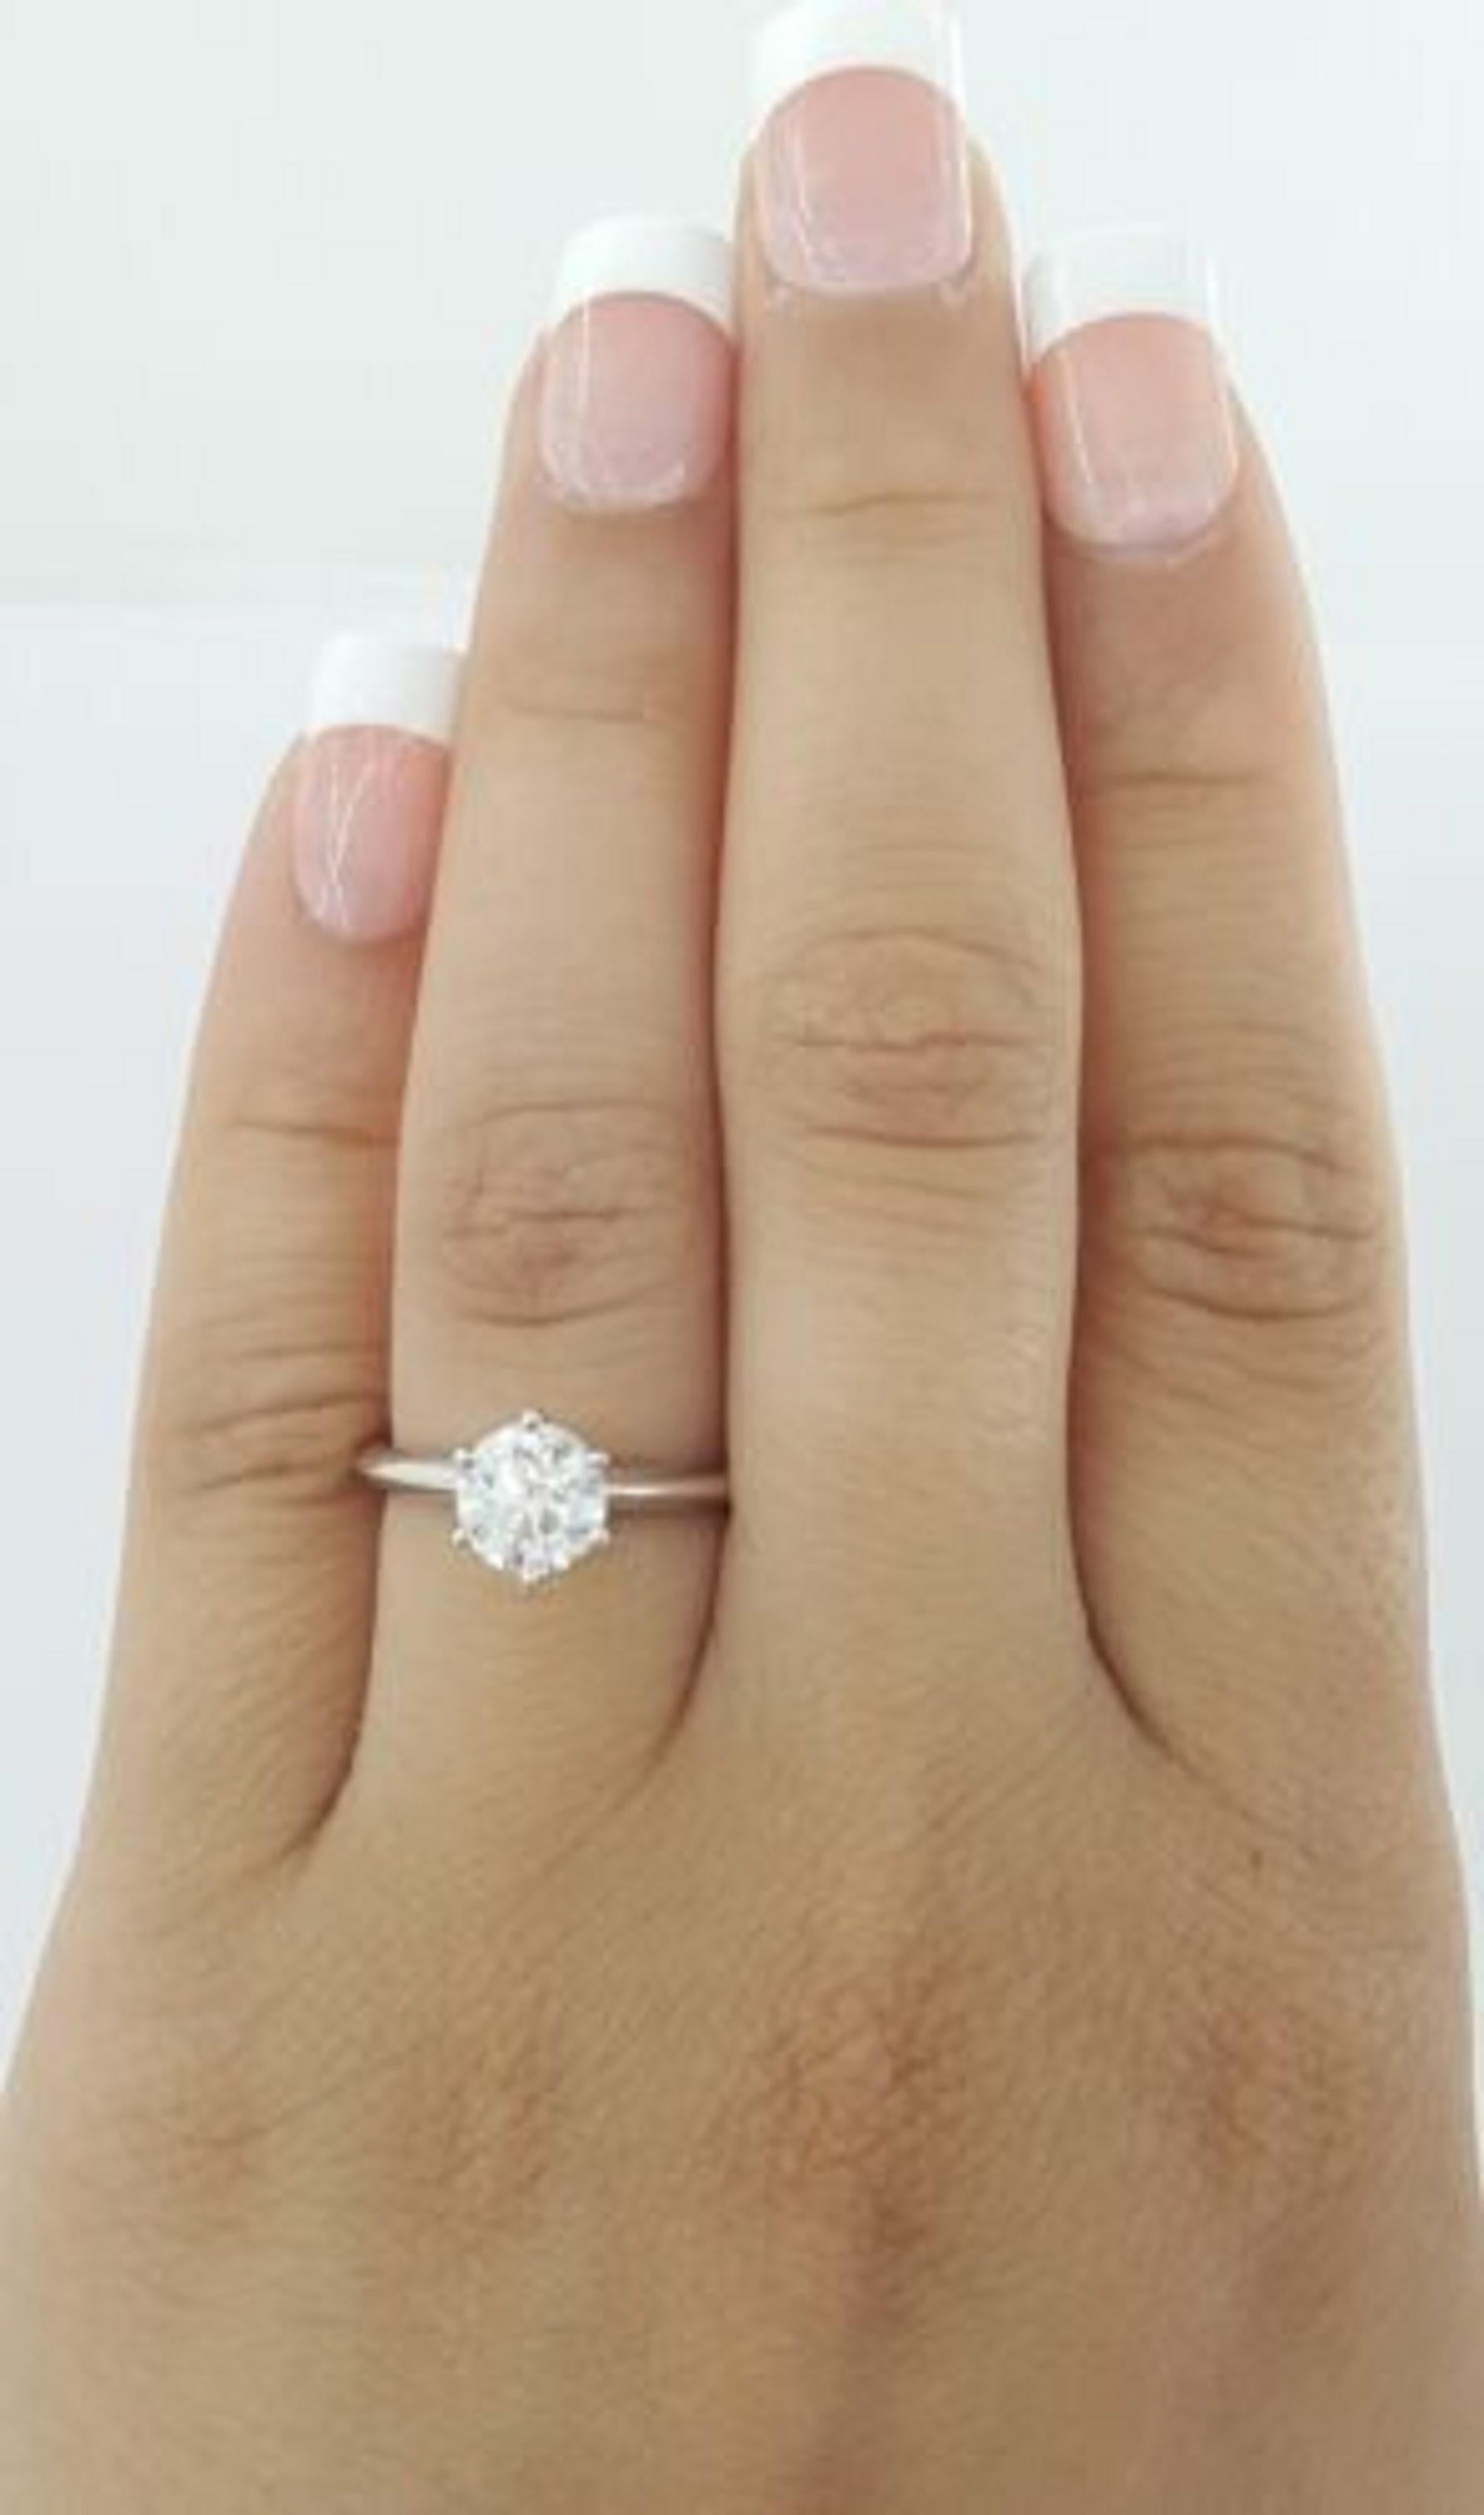 Tiffany & Co. Platinum 0.85 ct Total Weight Round Brilliant Cut Diamond Solitaire Engagement Ring.

The ring weighs 3 grams, size 5.25, the center stone is a Natural Round Brilliant Cut diamond weighing 0.85 ct, D in color, VS1 in clarity